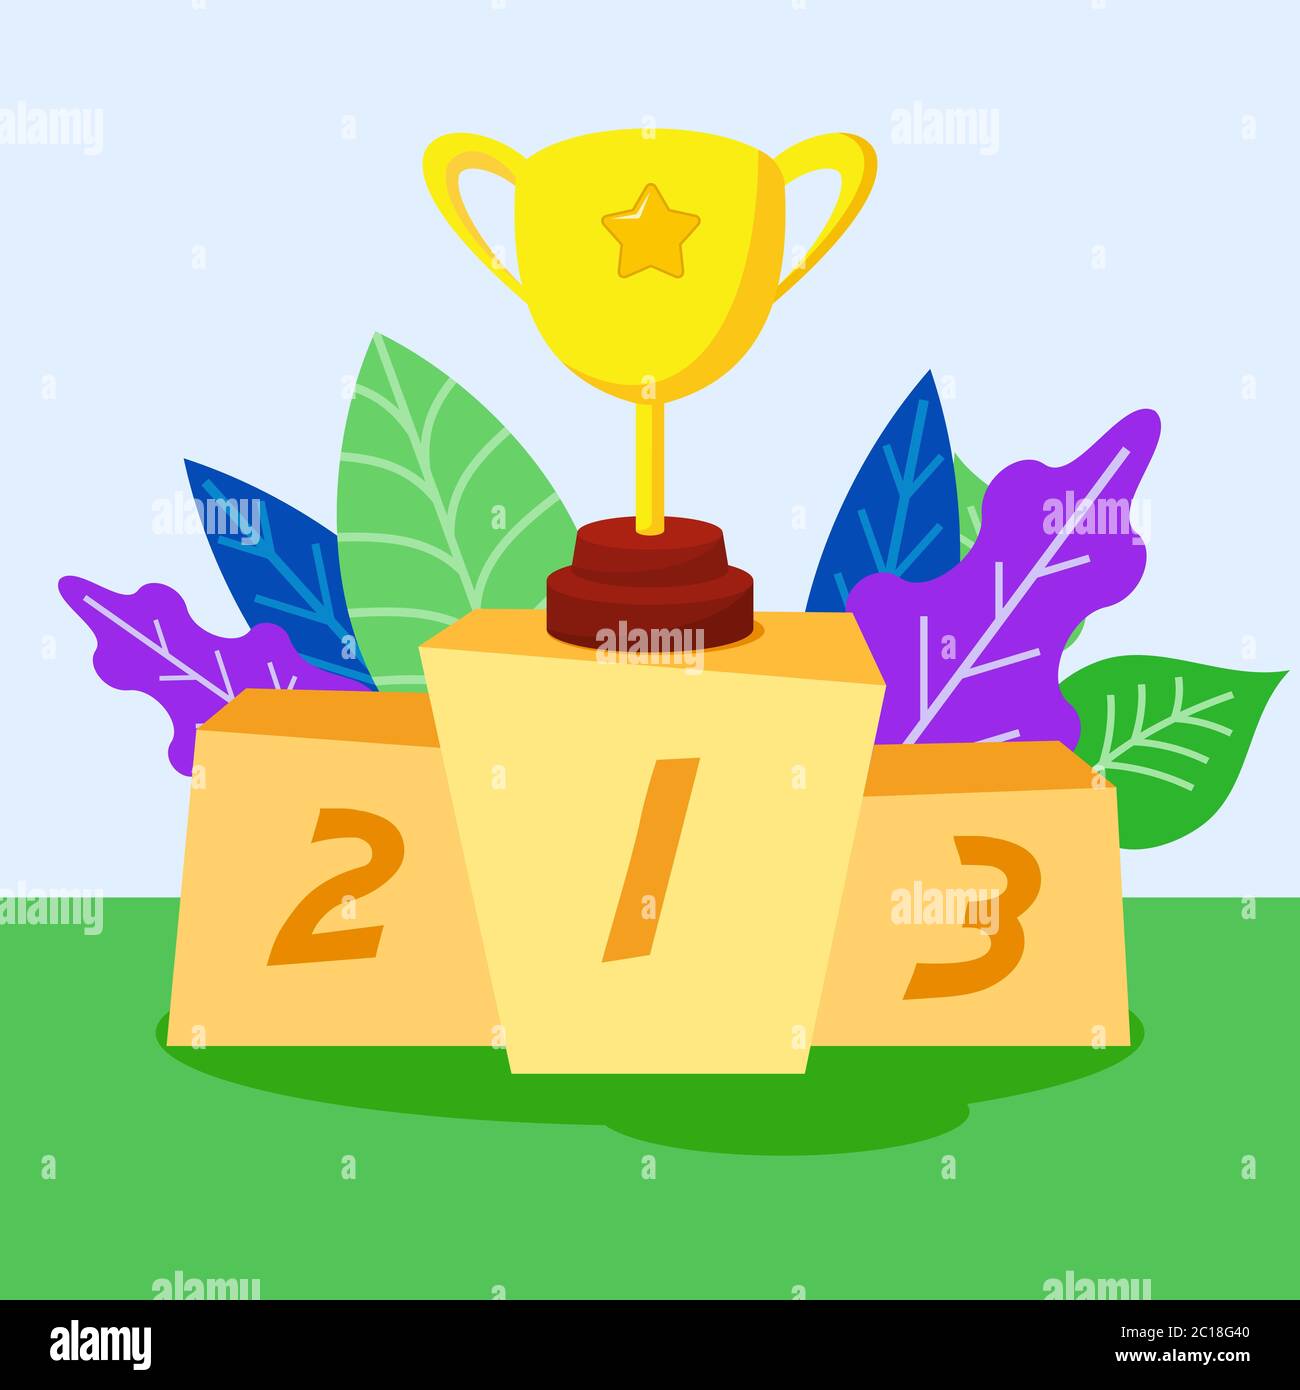 Illustration of a trophy for a championship winner. Podium champions in a competition with an abstract plant background. Stock Vector